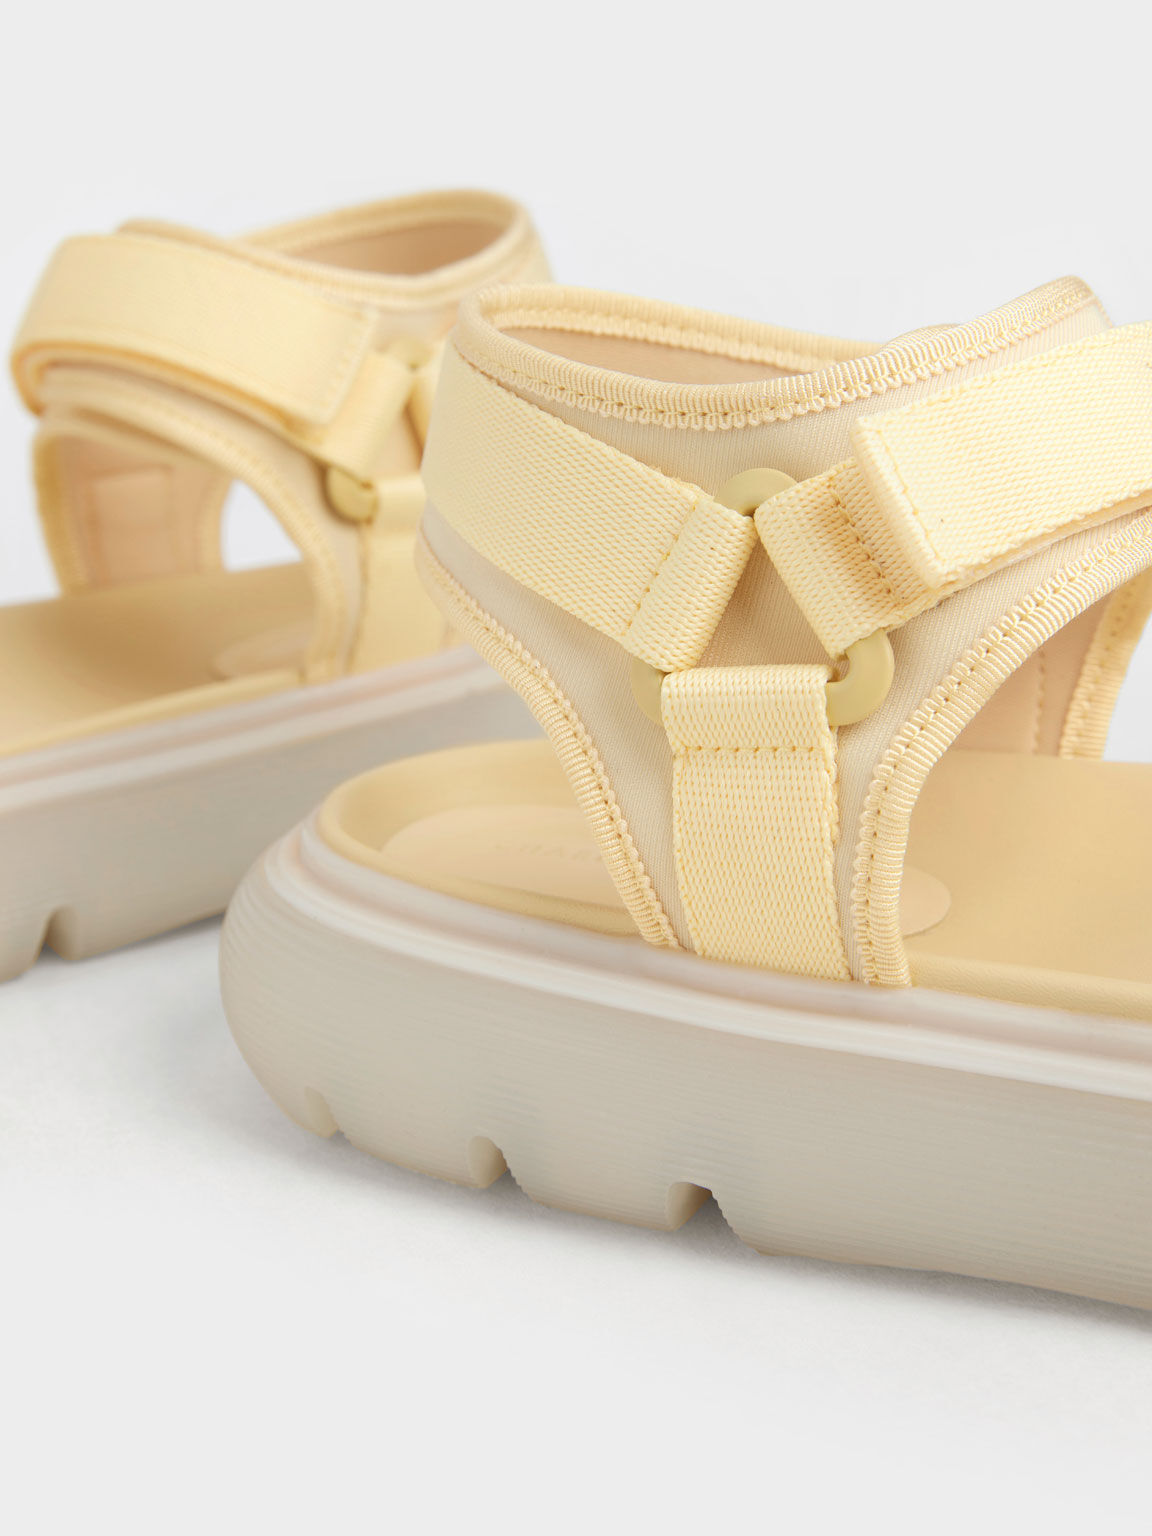 Sandal Sport Recycled Polyester Velcro-Strap, Yellow, hi-res